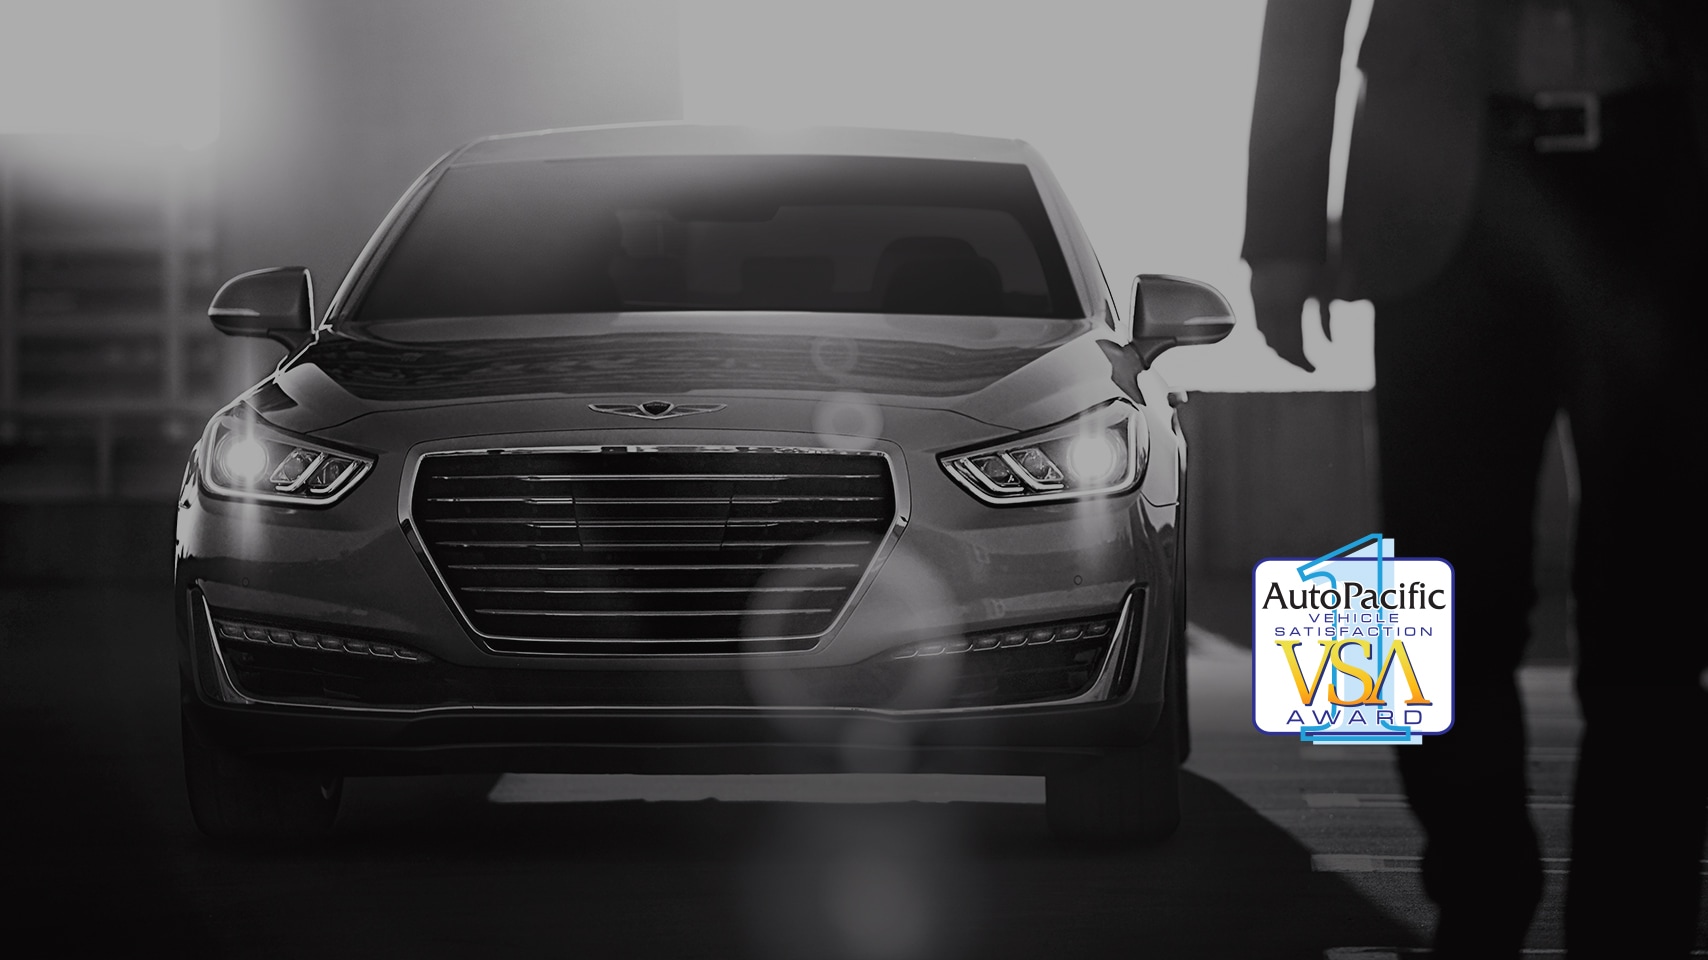 2018 Genesis G90 shown with AutoPacific vehicle satisfaction award badge.